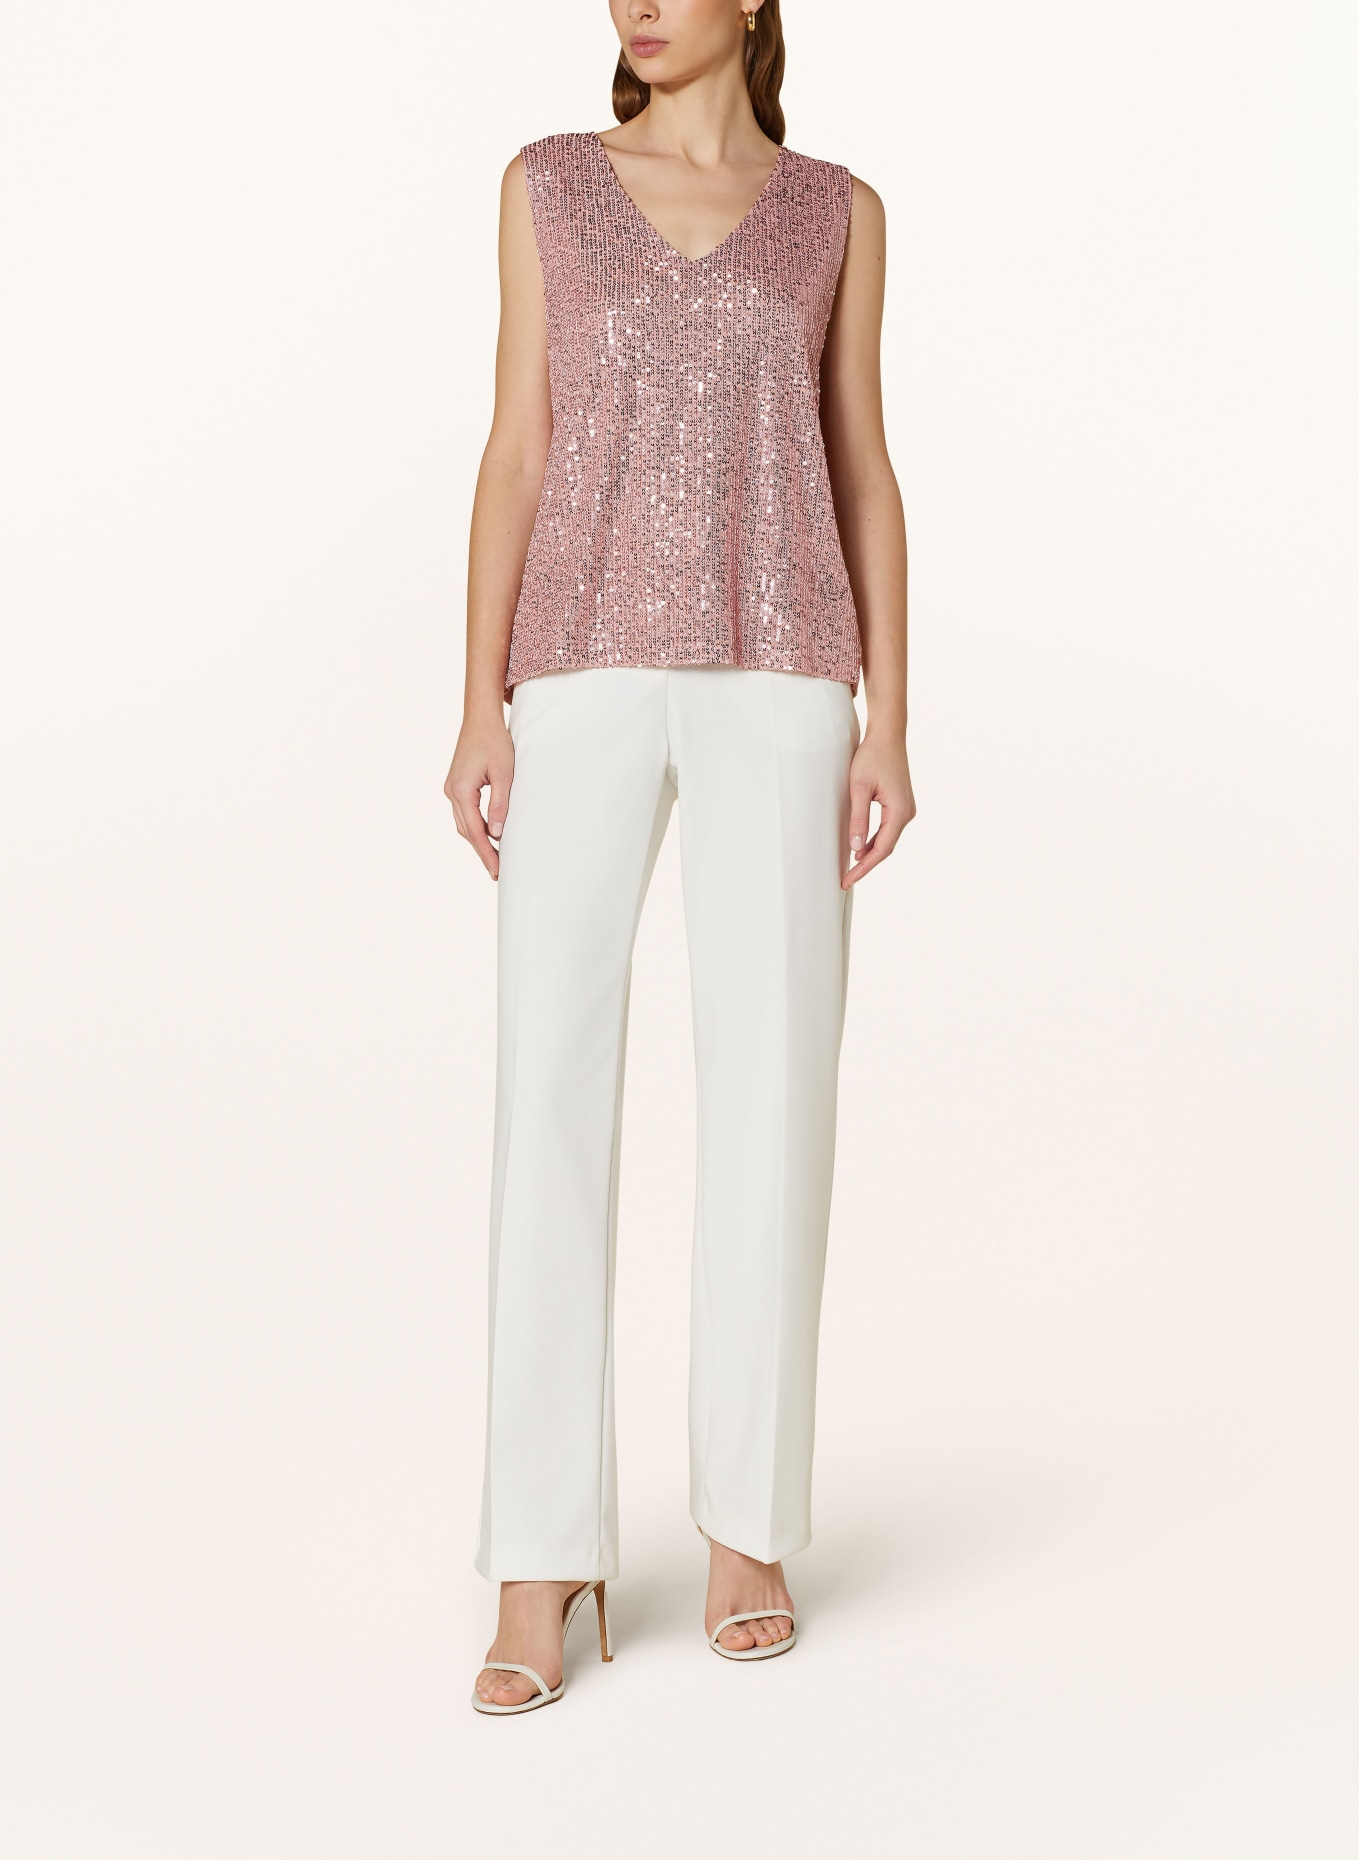 MORE & MORE Top with sequins, Color: 0814 powder rose (Image 2)